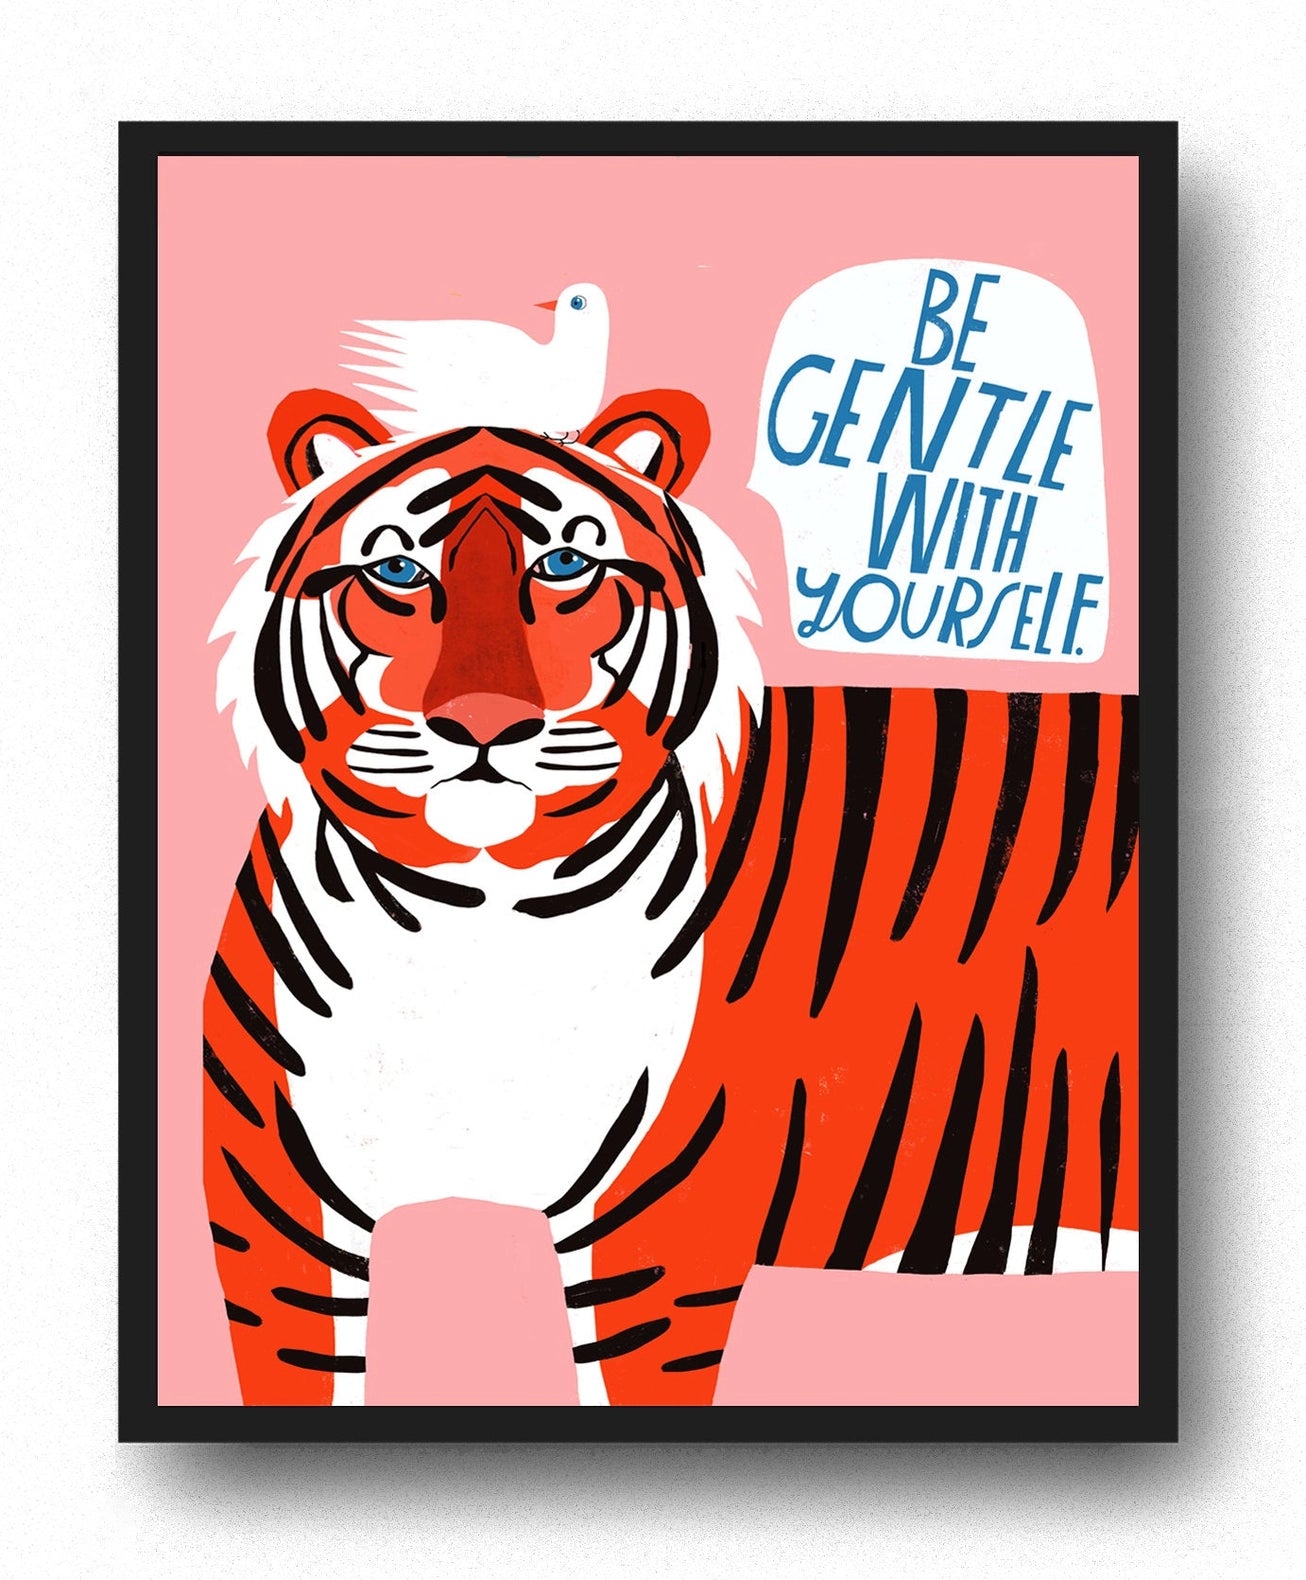 Be Gentle With Yourself - Giclee Print by Lisa Congdon